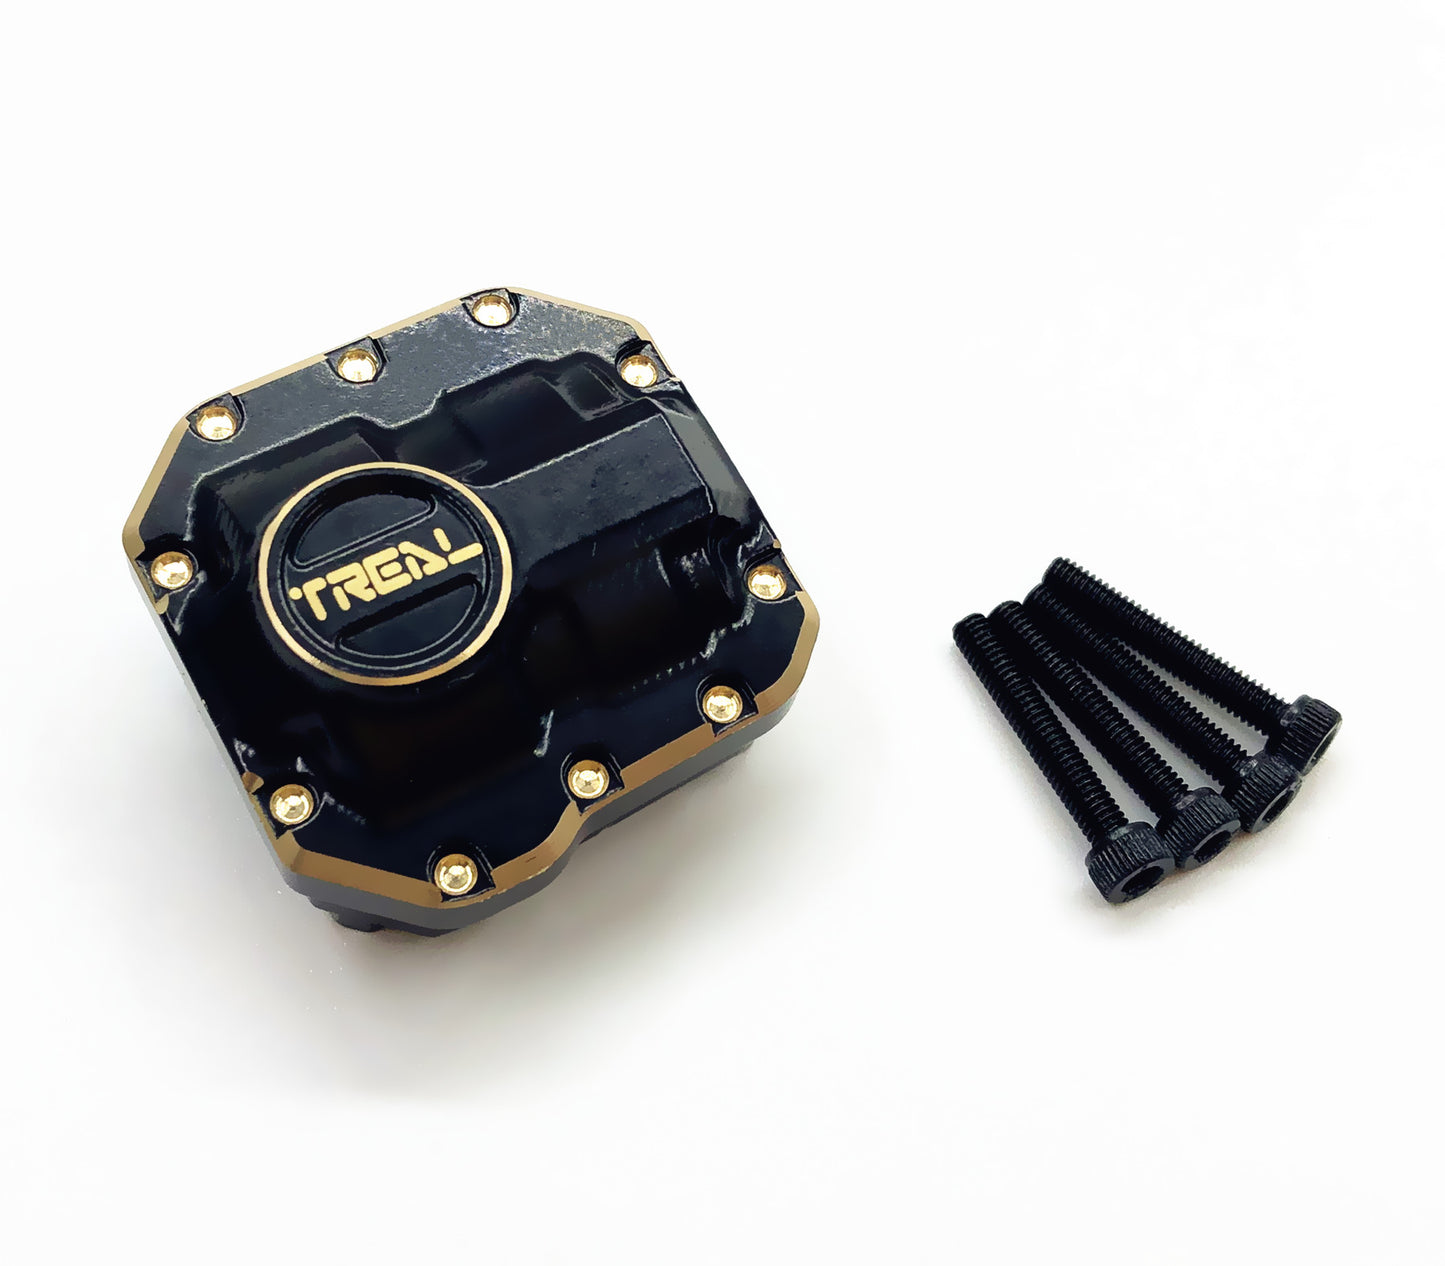 Treal Axial SCX10 II 2 Brass Diff Cover Front Rear 50g for 90046 90047 RC Crawler